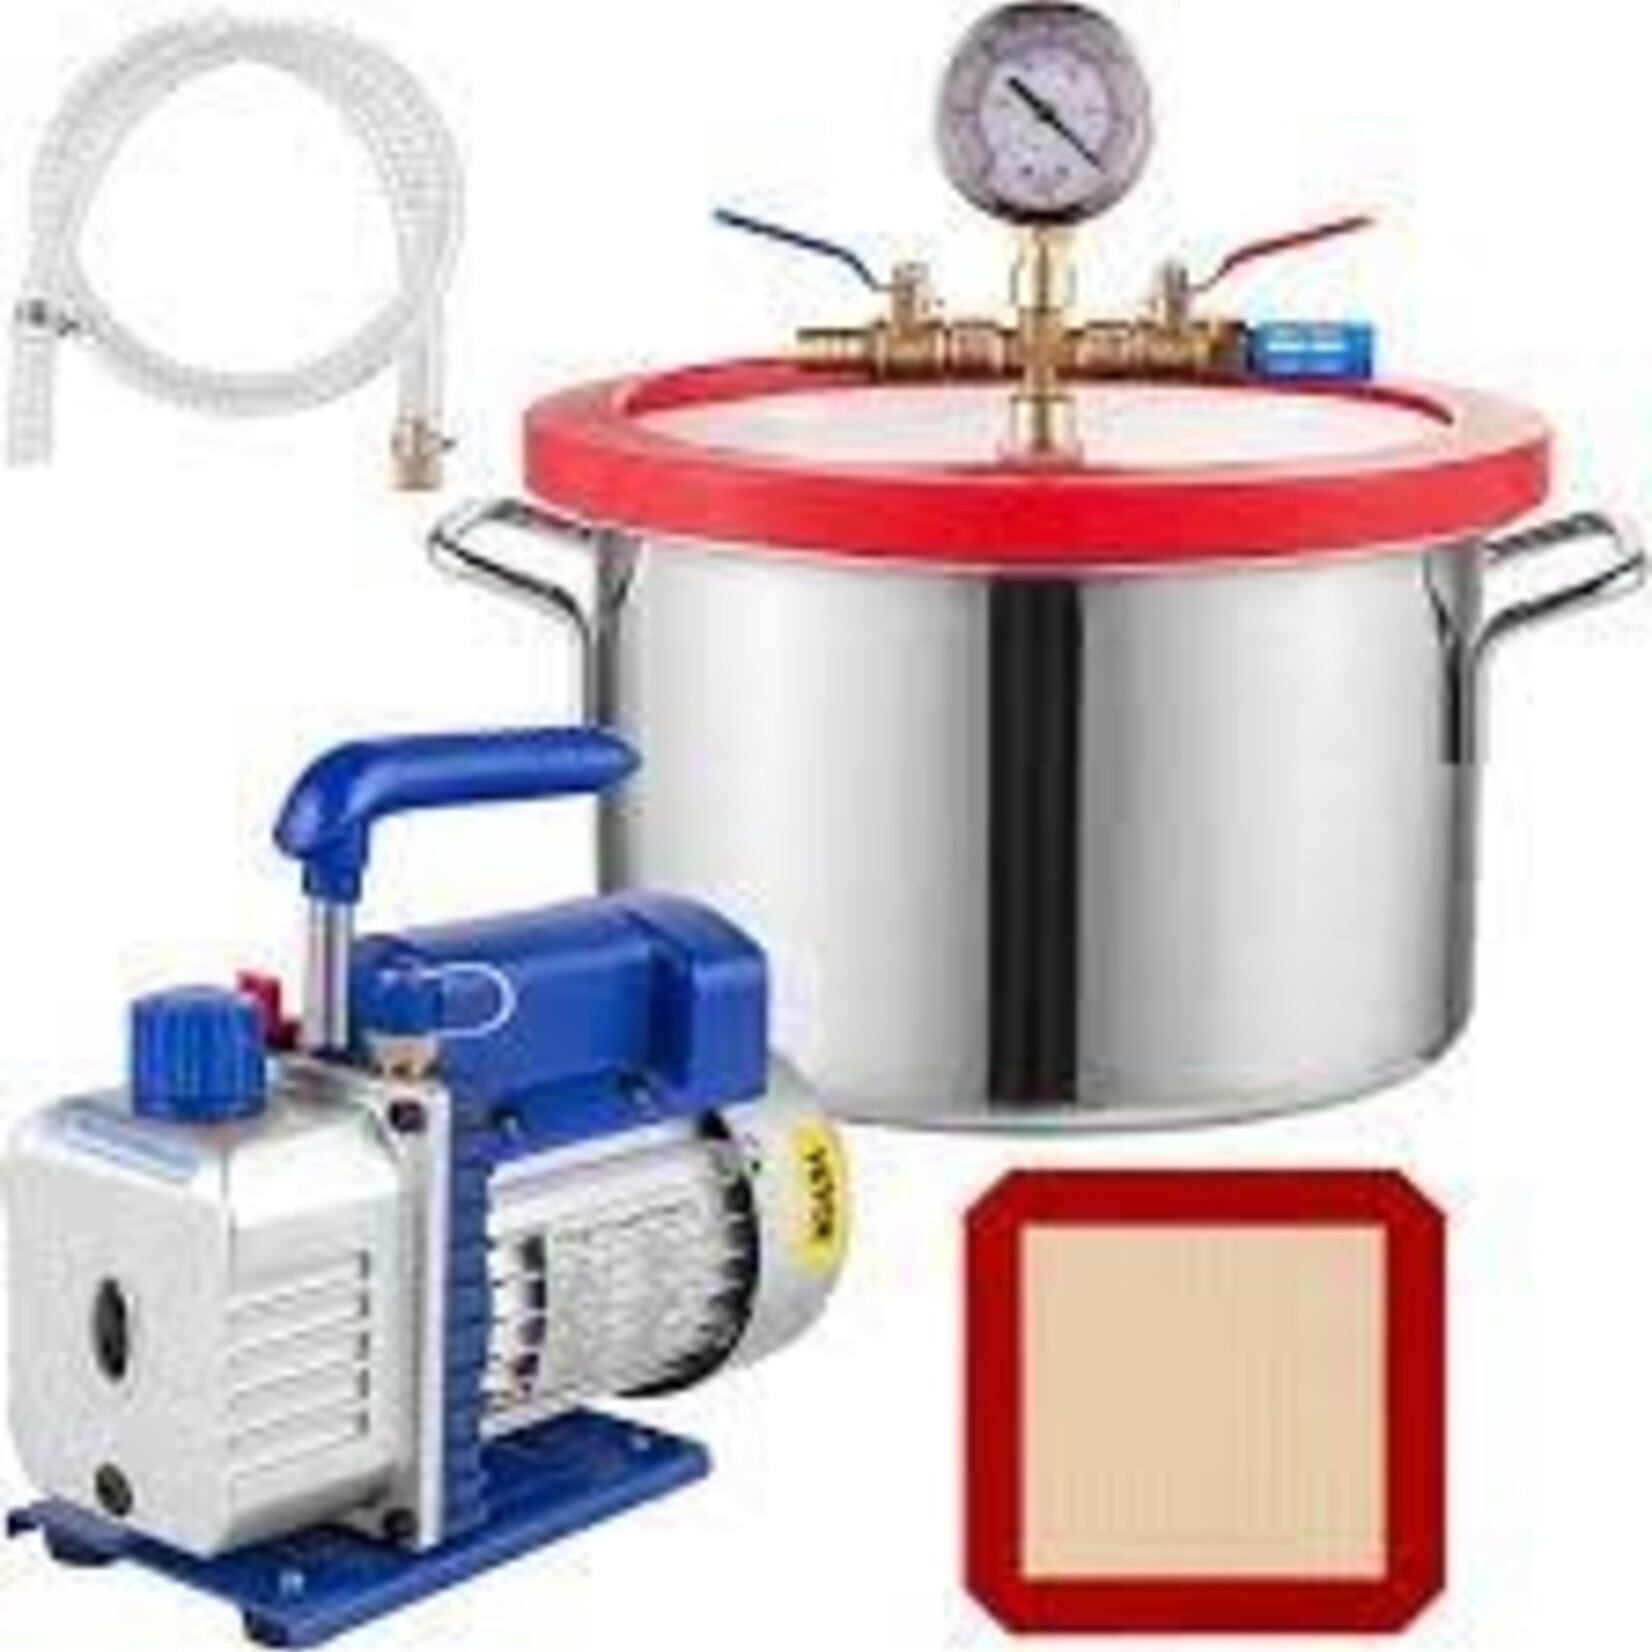 1.5 Gallon Stainless Steel Vacuum Degassing Chamber and 3 CFM Single Stage Pump Kit